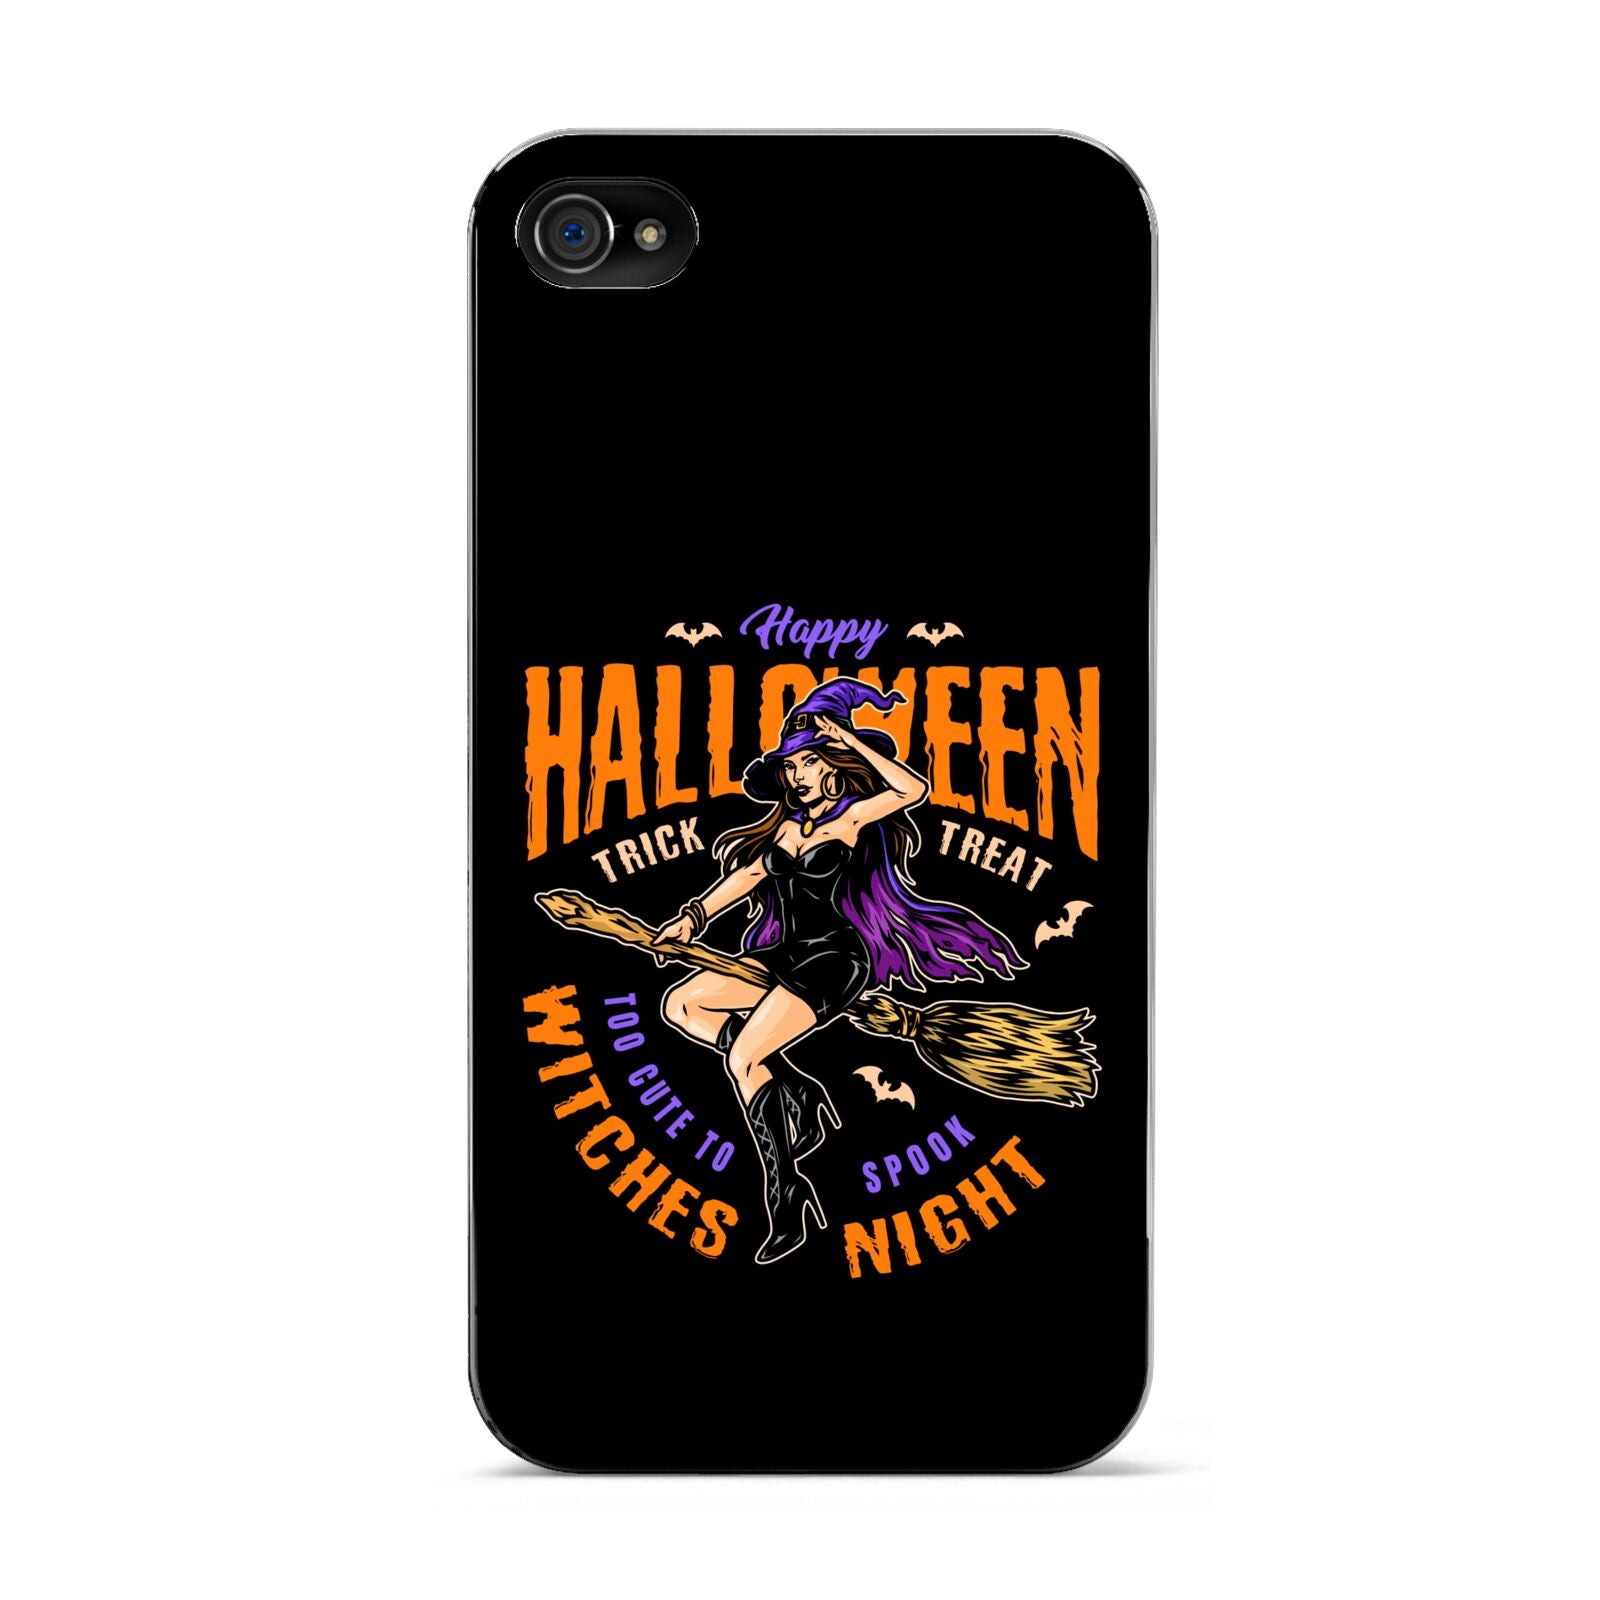 Witches Night Apple iPhone 4s Case